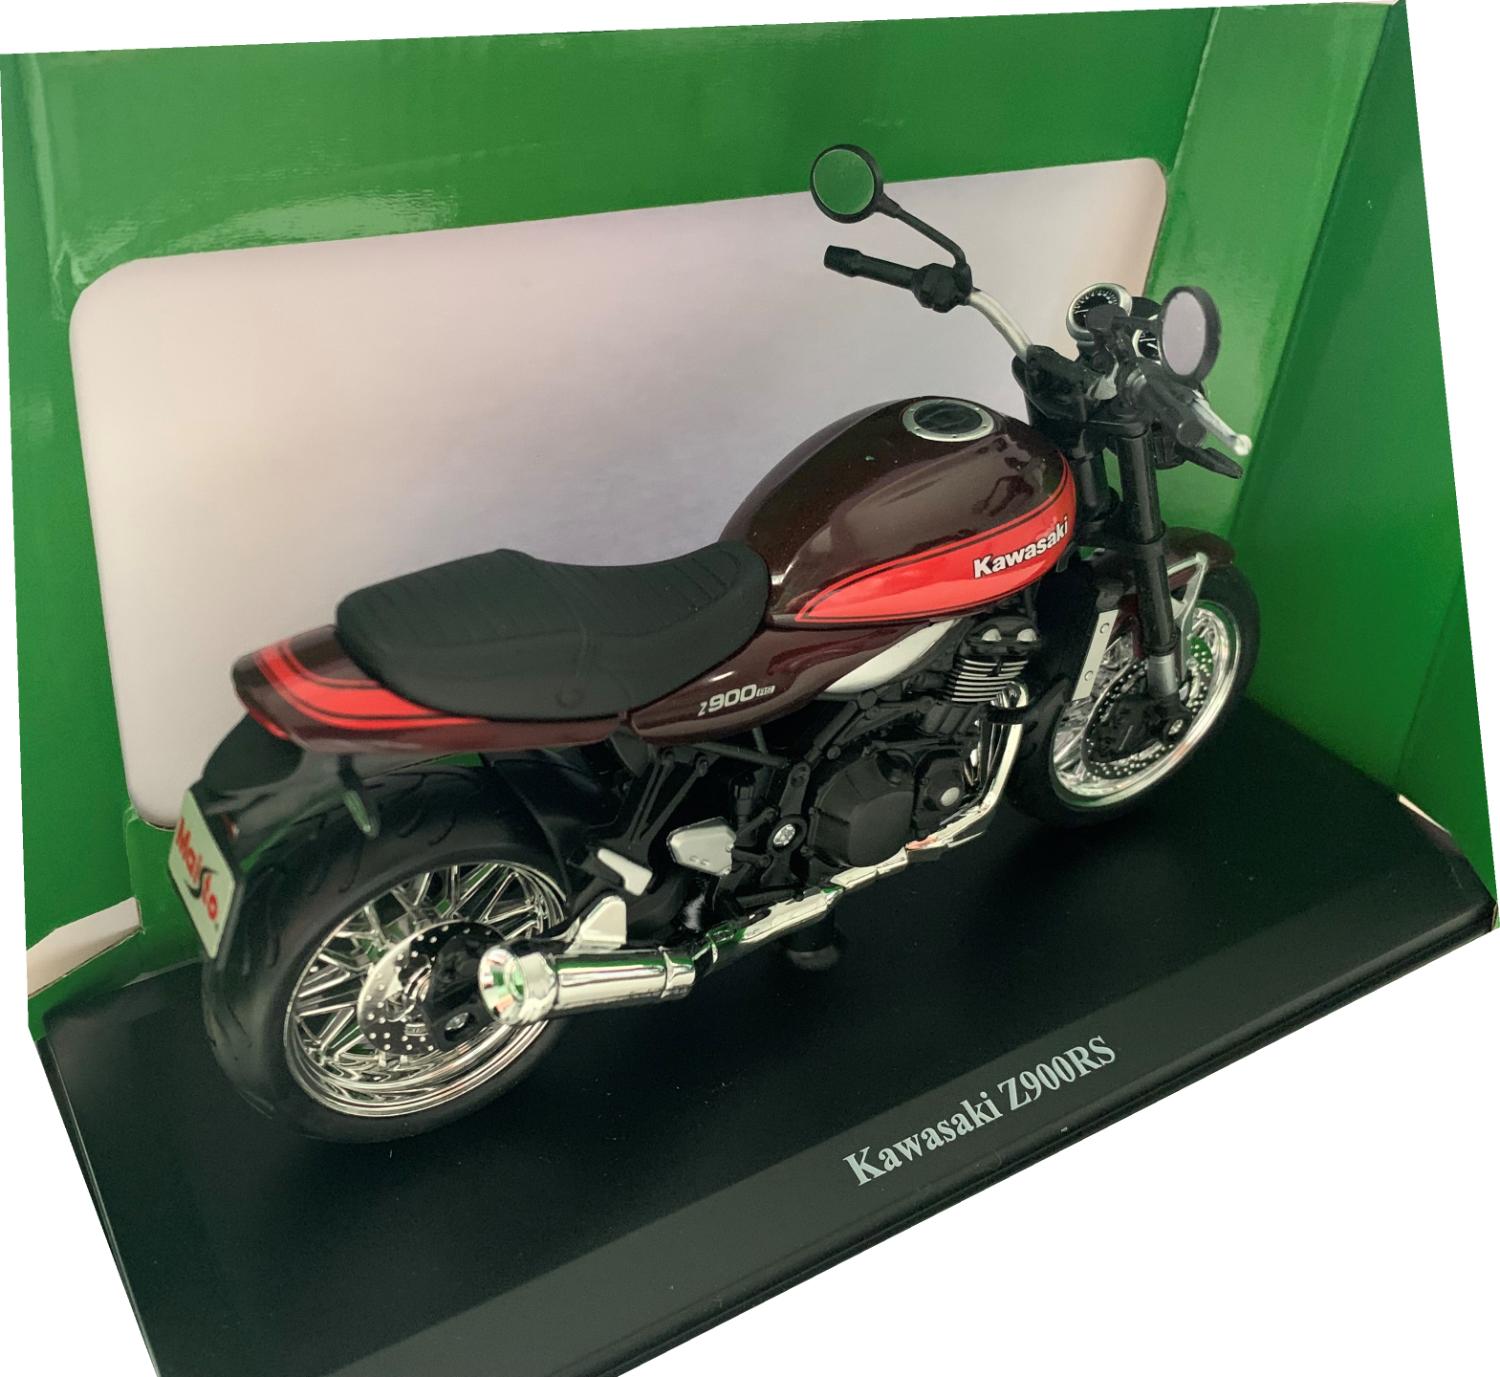 Kawasaki Z900RS in brown / red 1:12 scale model from Maisto,  mounted on  a plinth, presented in a green Kawasaki themed box.